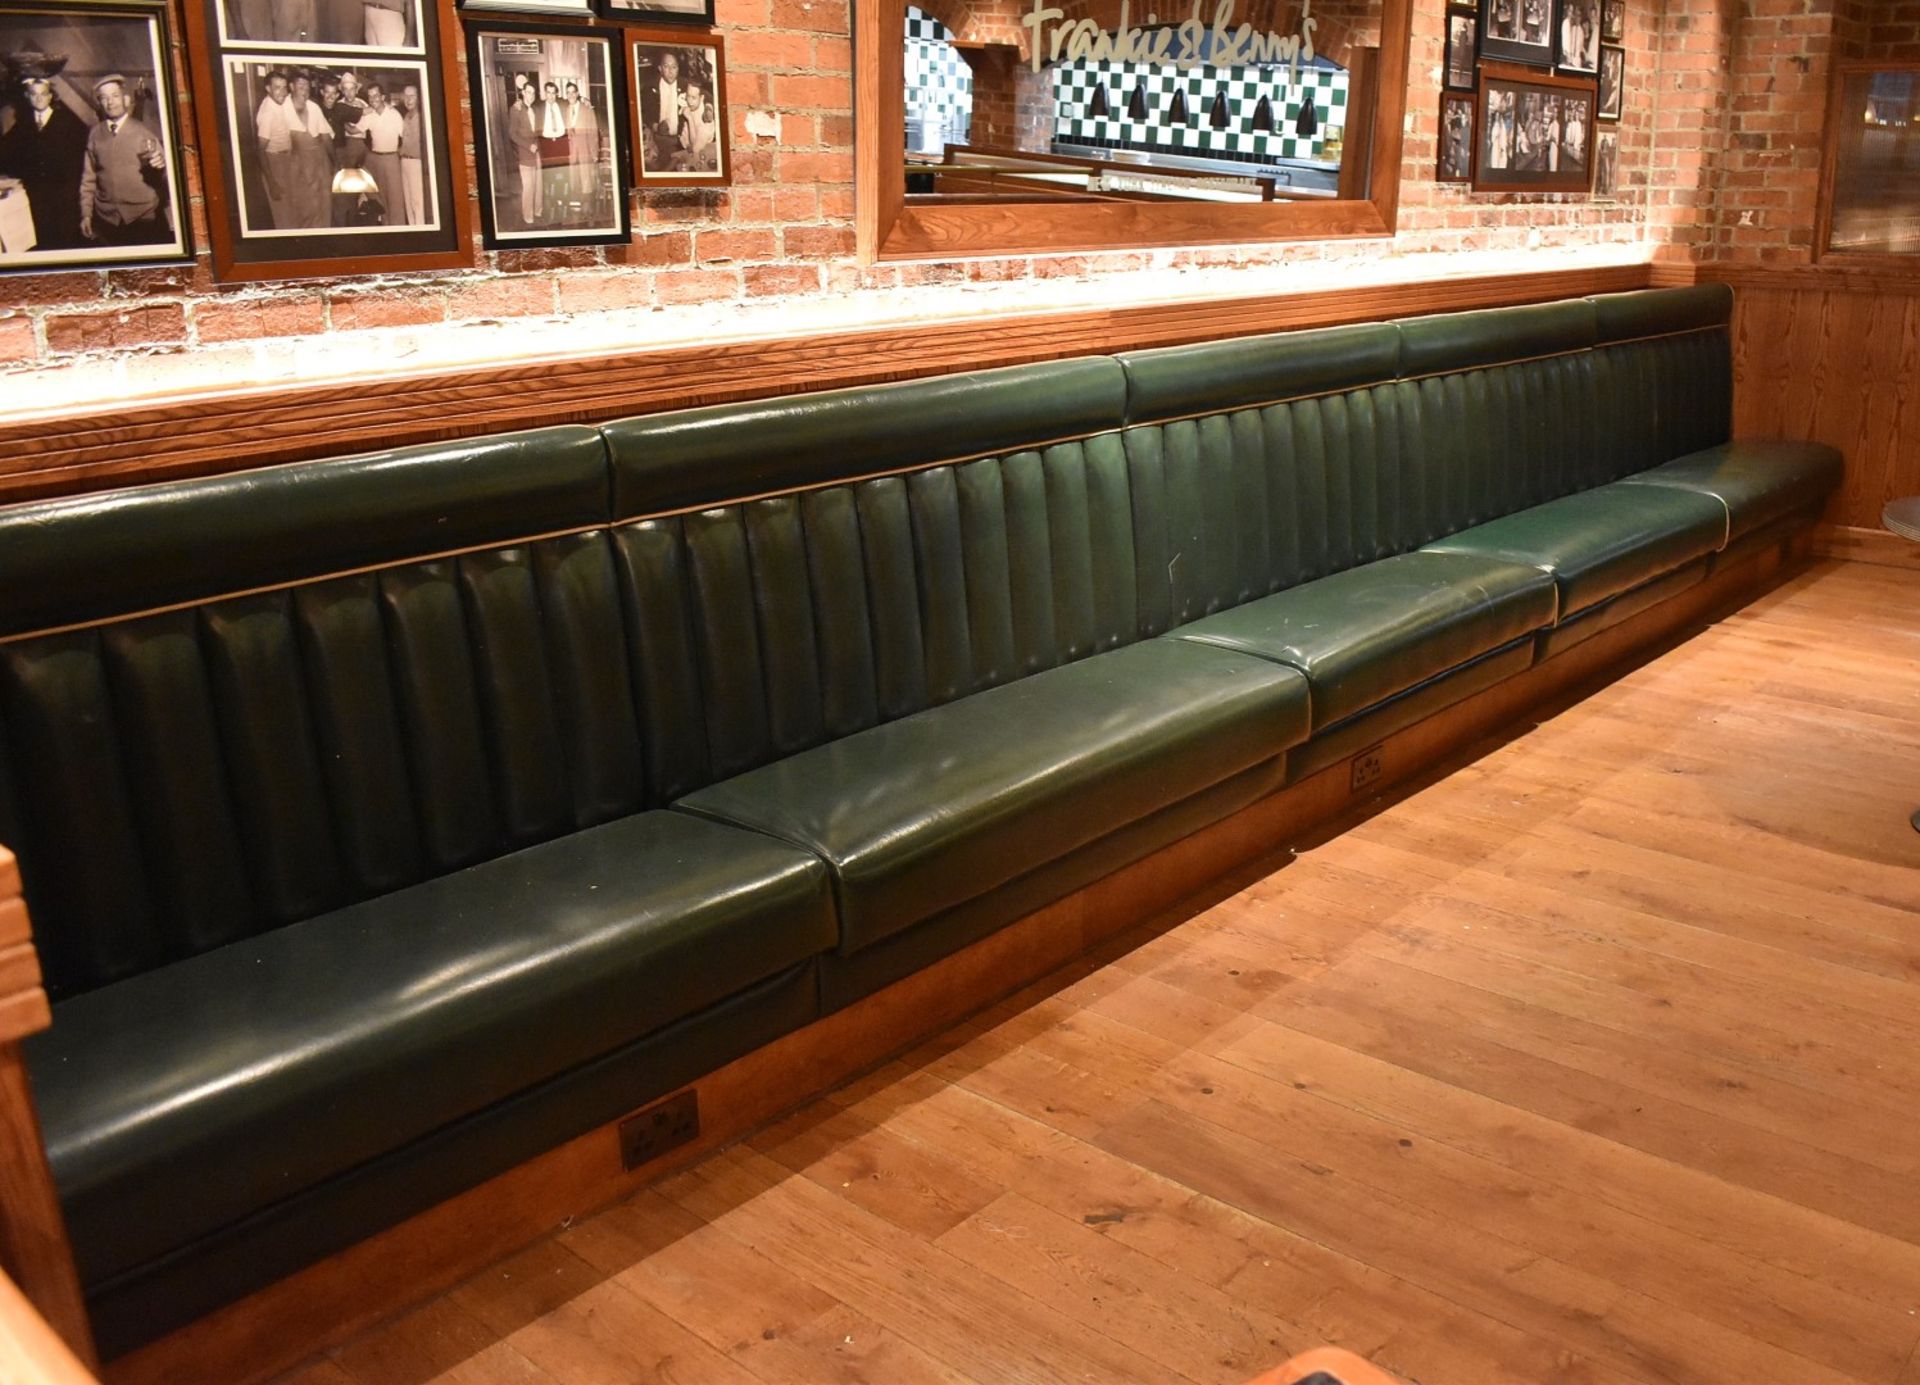 7.1-Metres Of Restaurant Booth Seating (5 x Sections) - Upholstered In Dark Green Faux Leather - Image 3 of 5